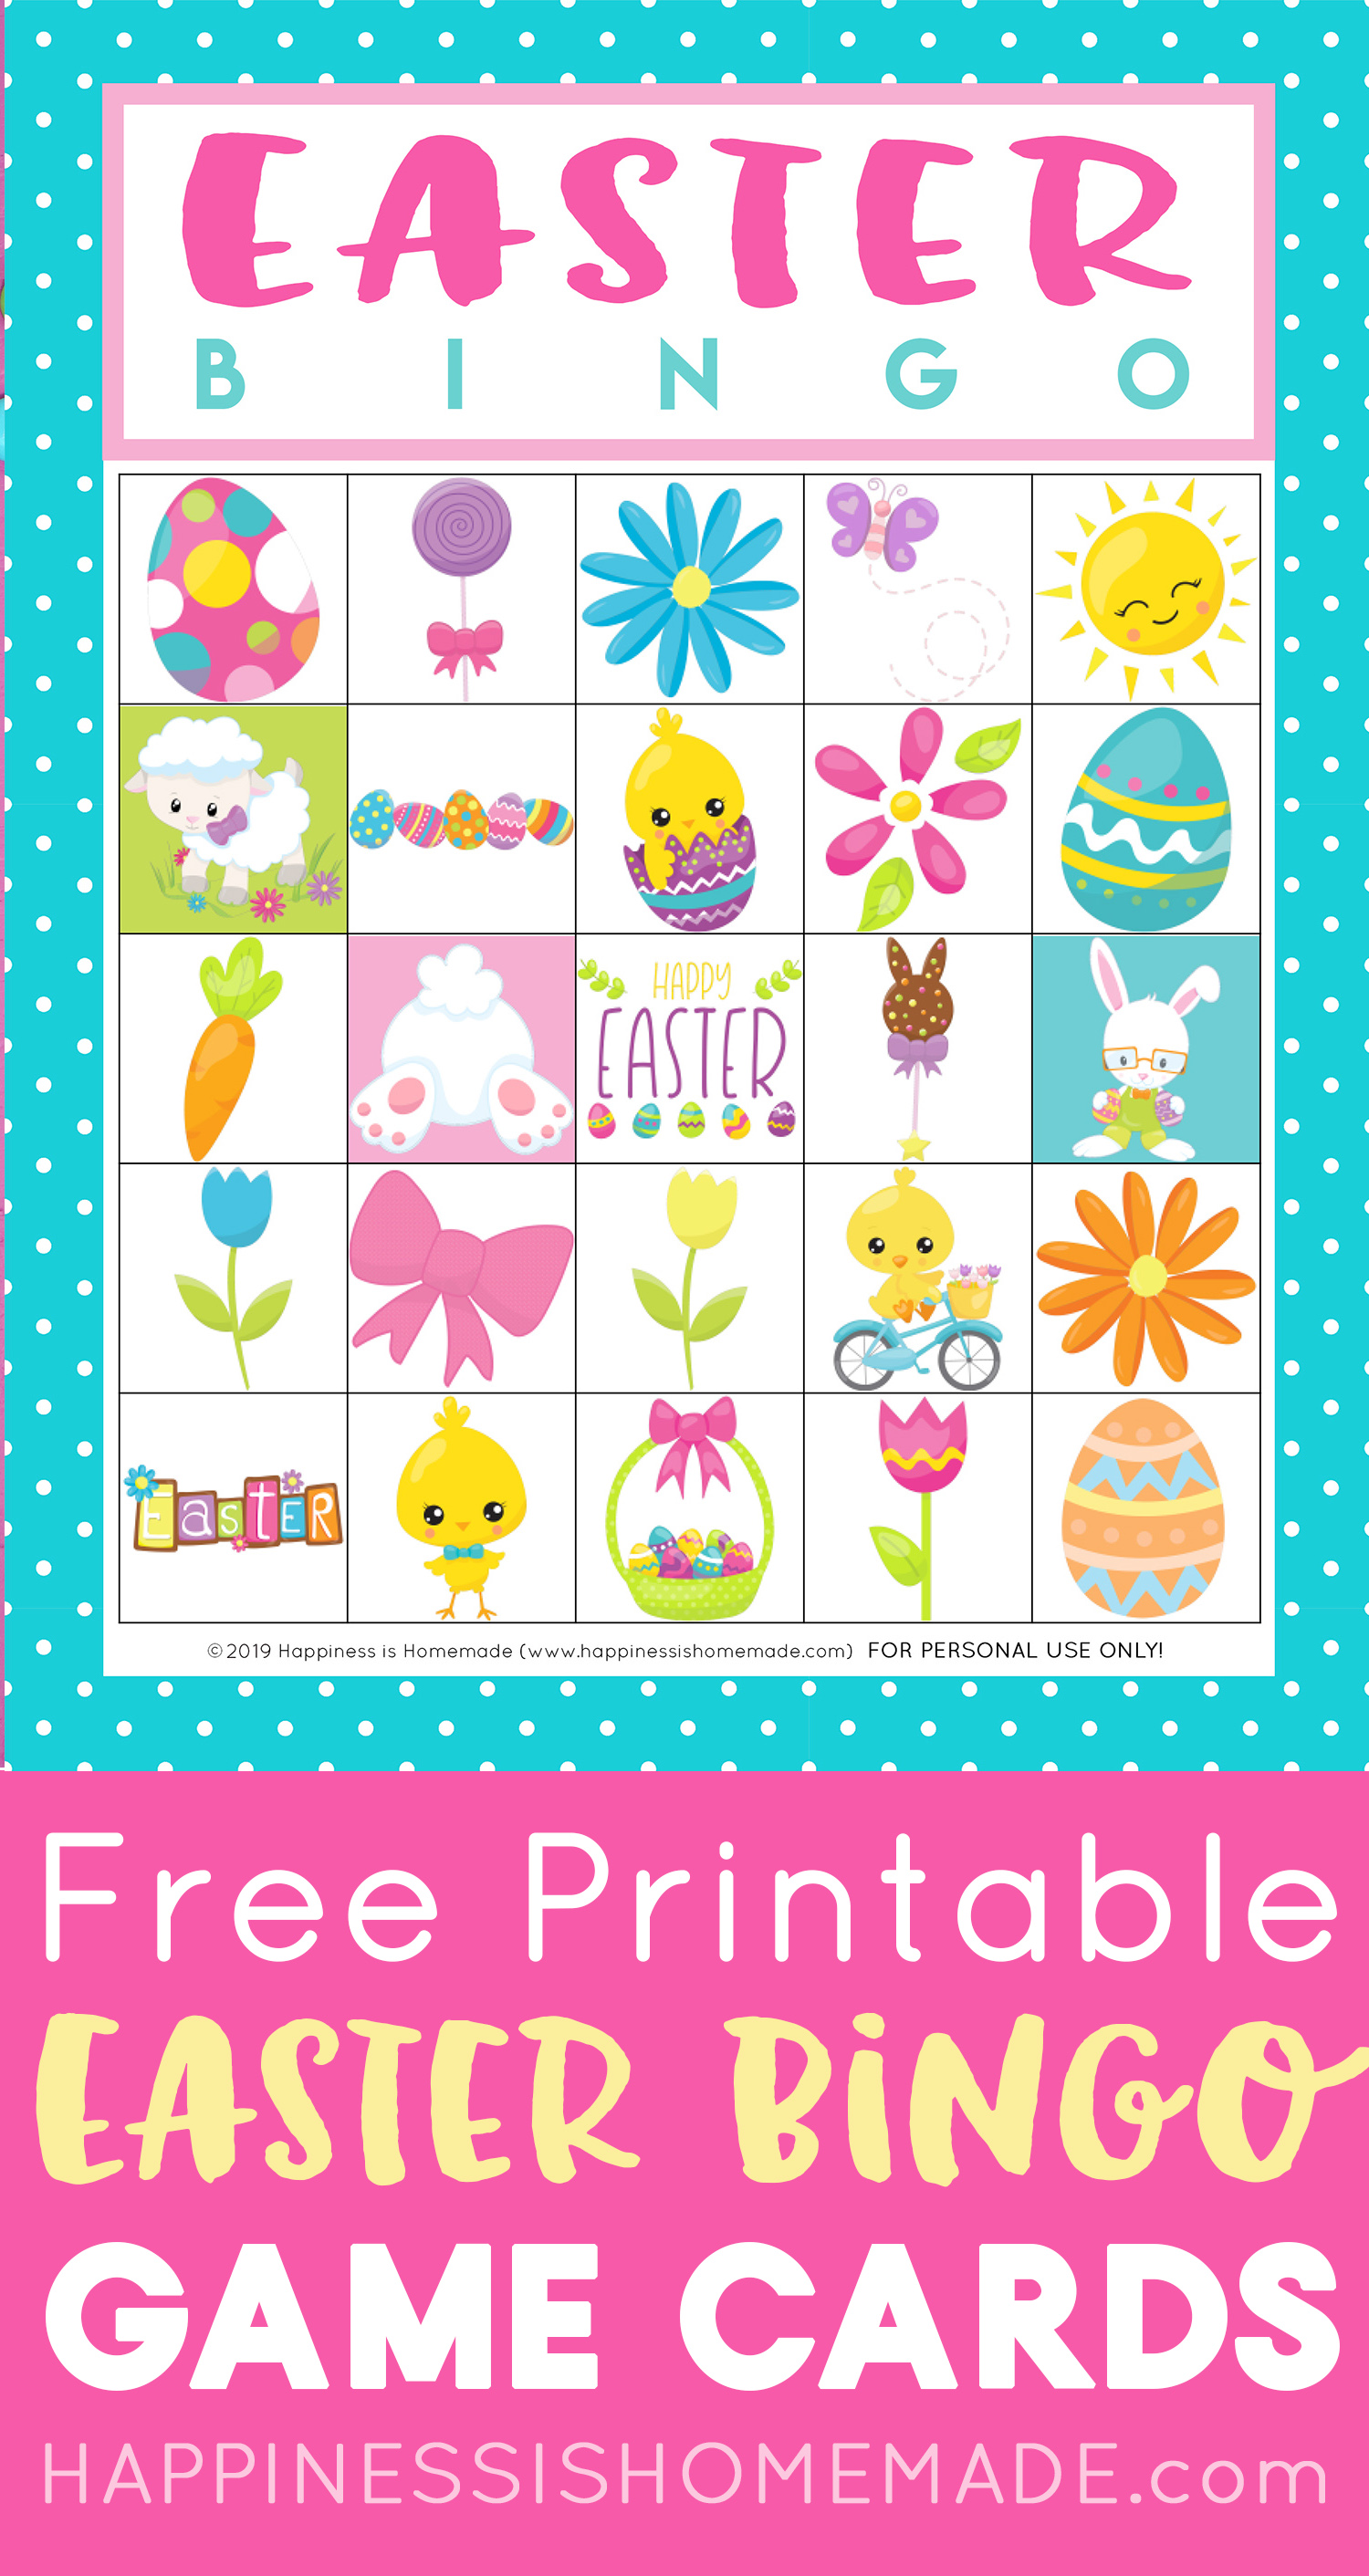 free-printable-easter-bingo-game-cards-happiness-is-homemade